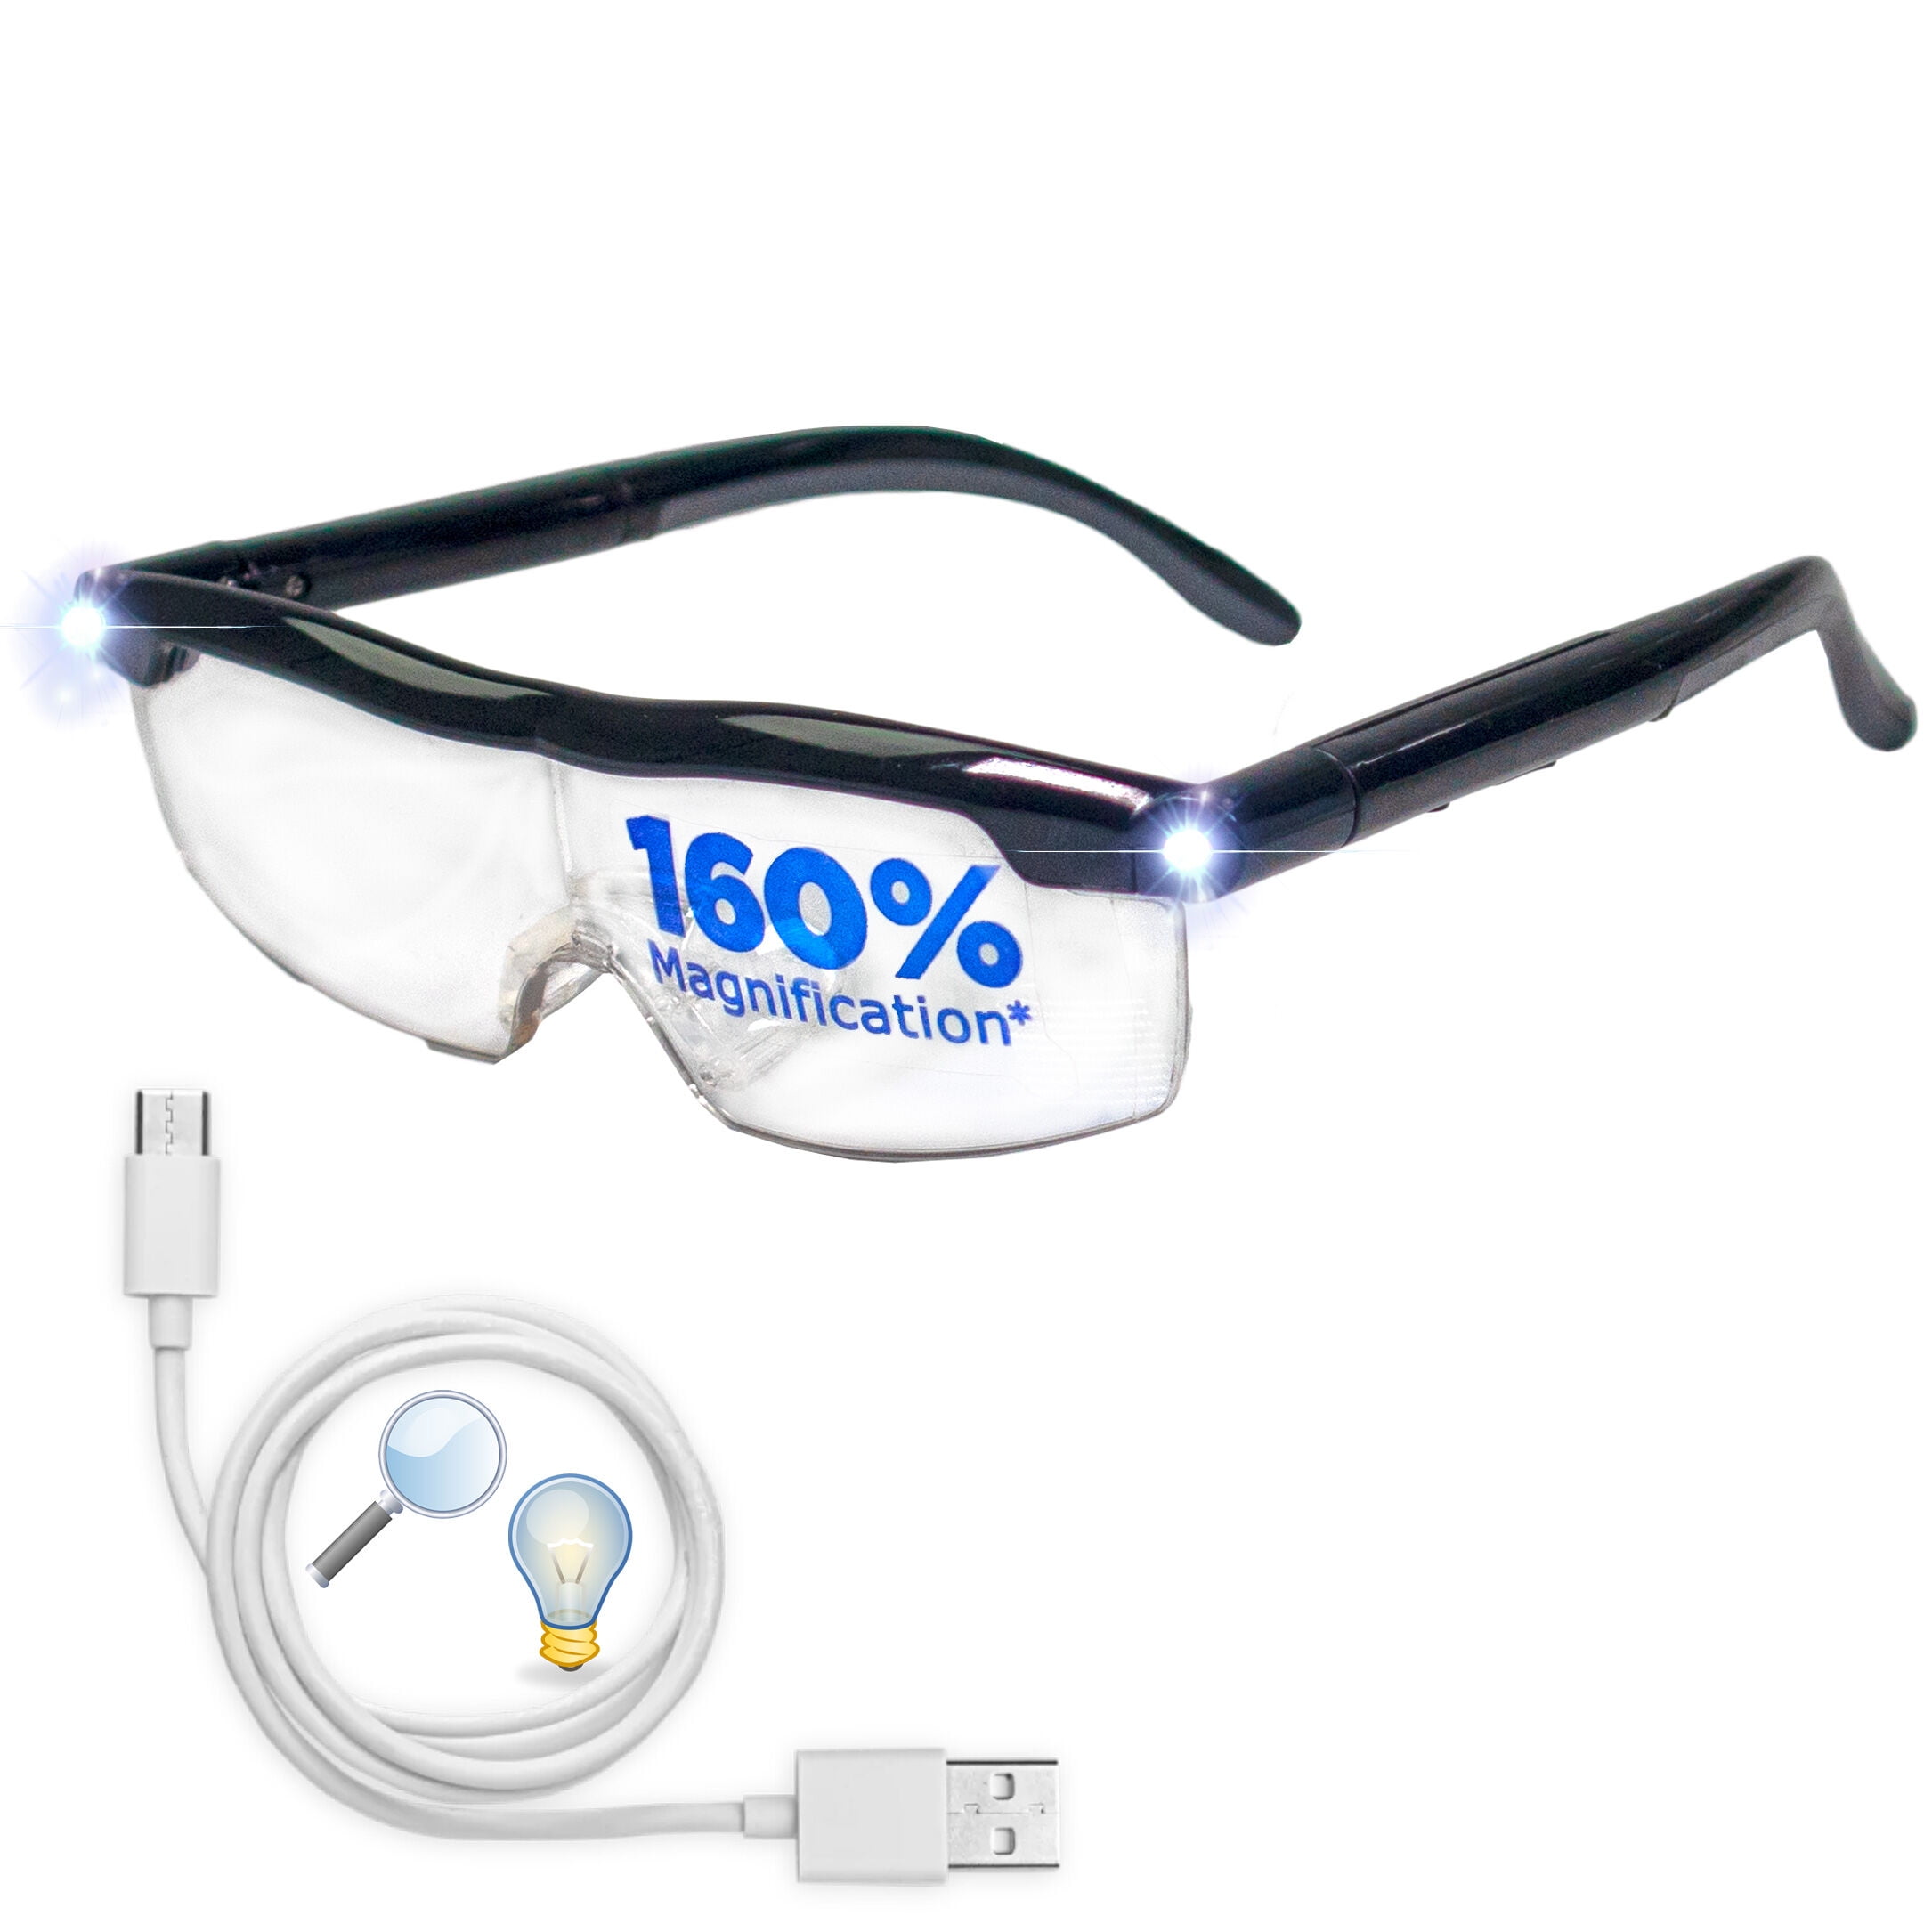 LED Magnifying Glasses w/ 1.6X Magnification - Bright Lighted Eyeglass  Lights, USB Rechargeable, Lightweight & Durable - LED Eyewear Enhances Your